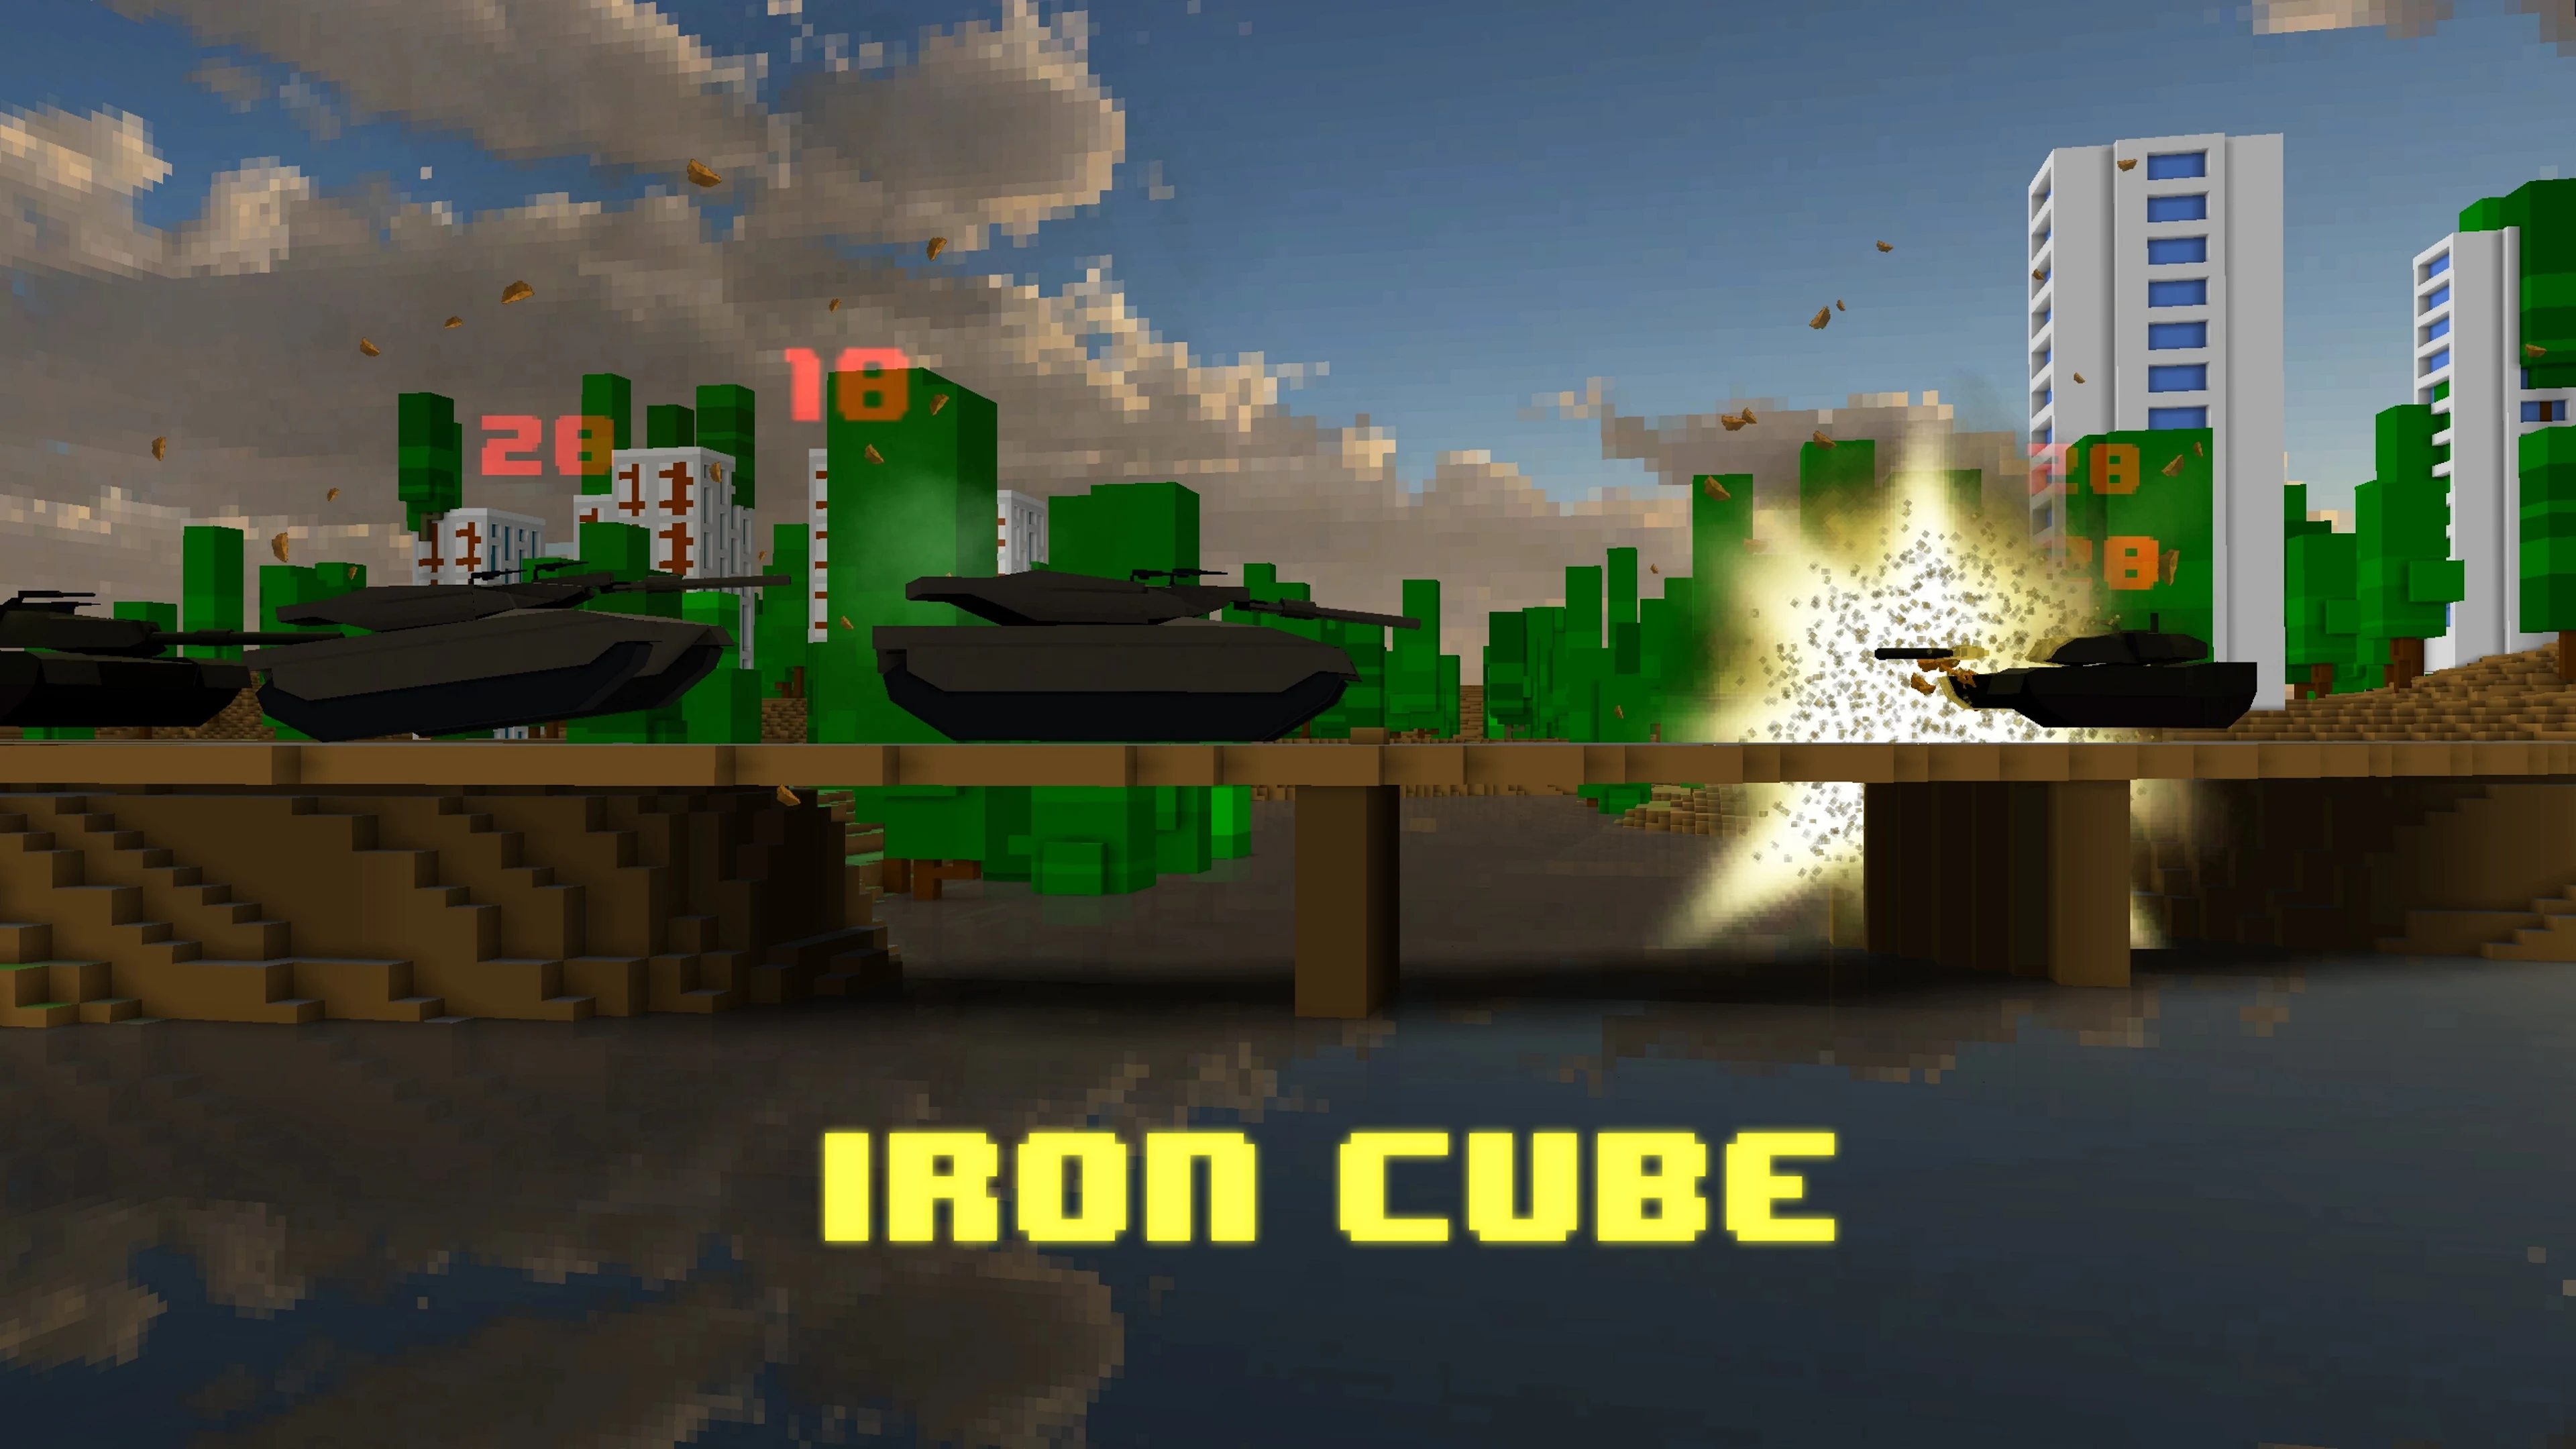 Cube – A game about Google Maps –